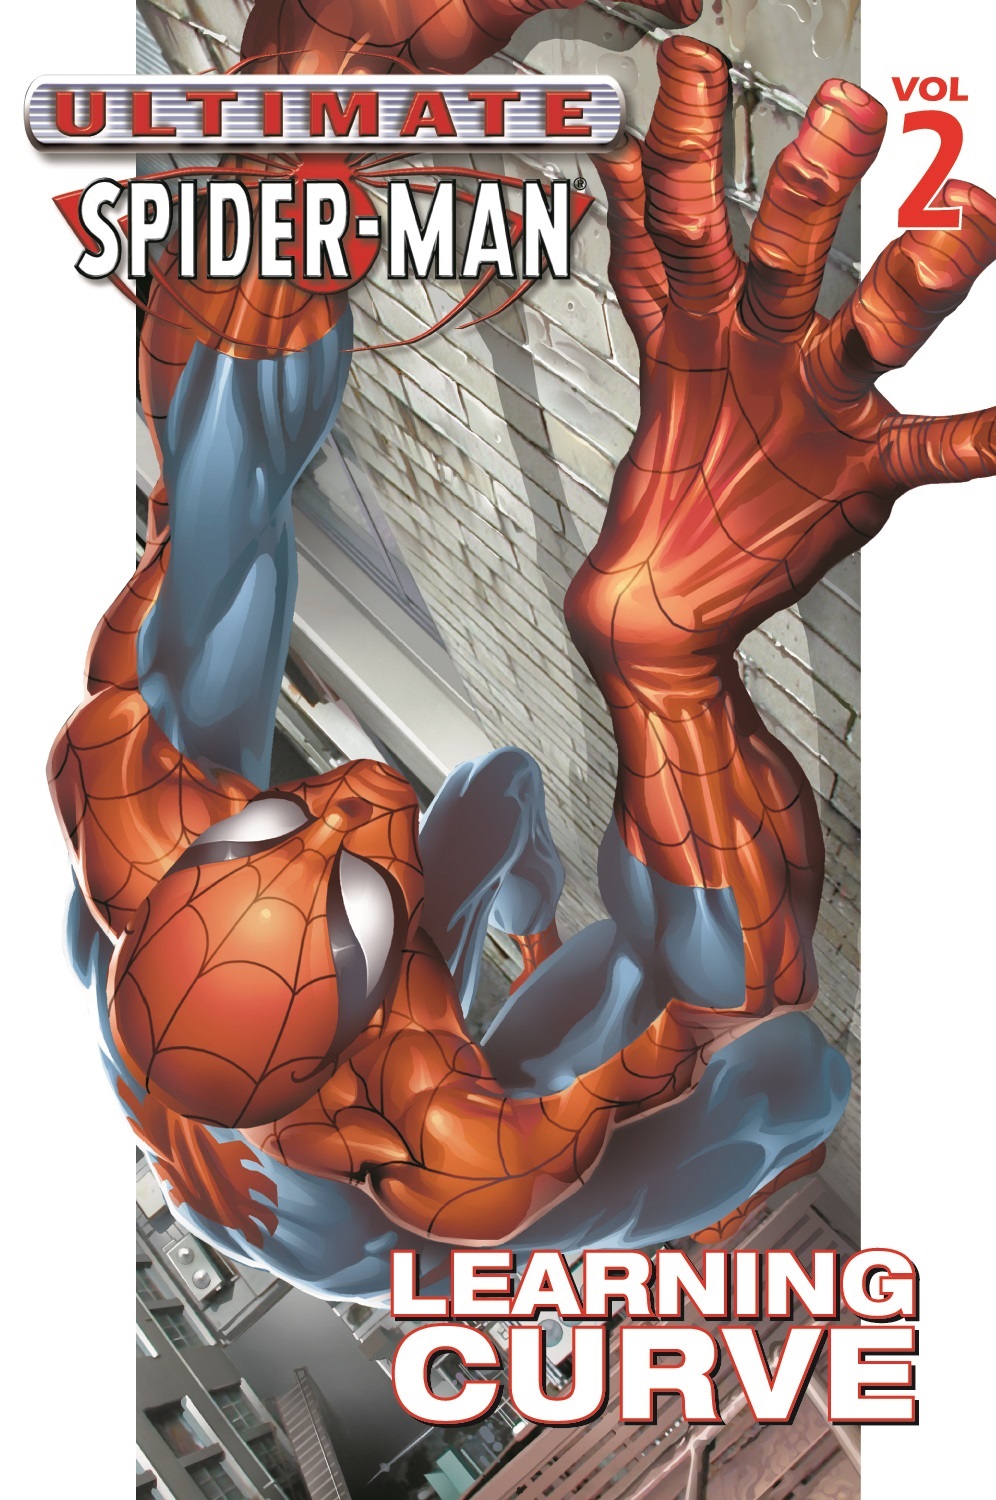 Ultimate Spider-Man Vol. 2: Learning Curve (Trade Paperback)